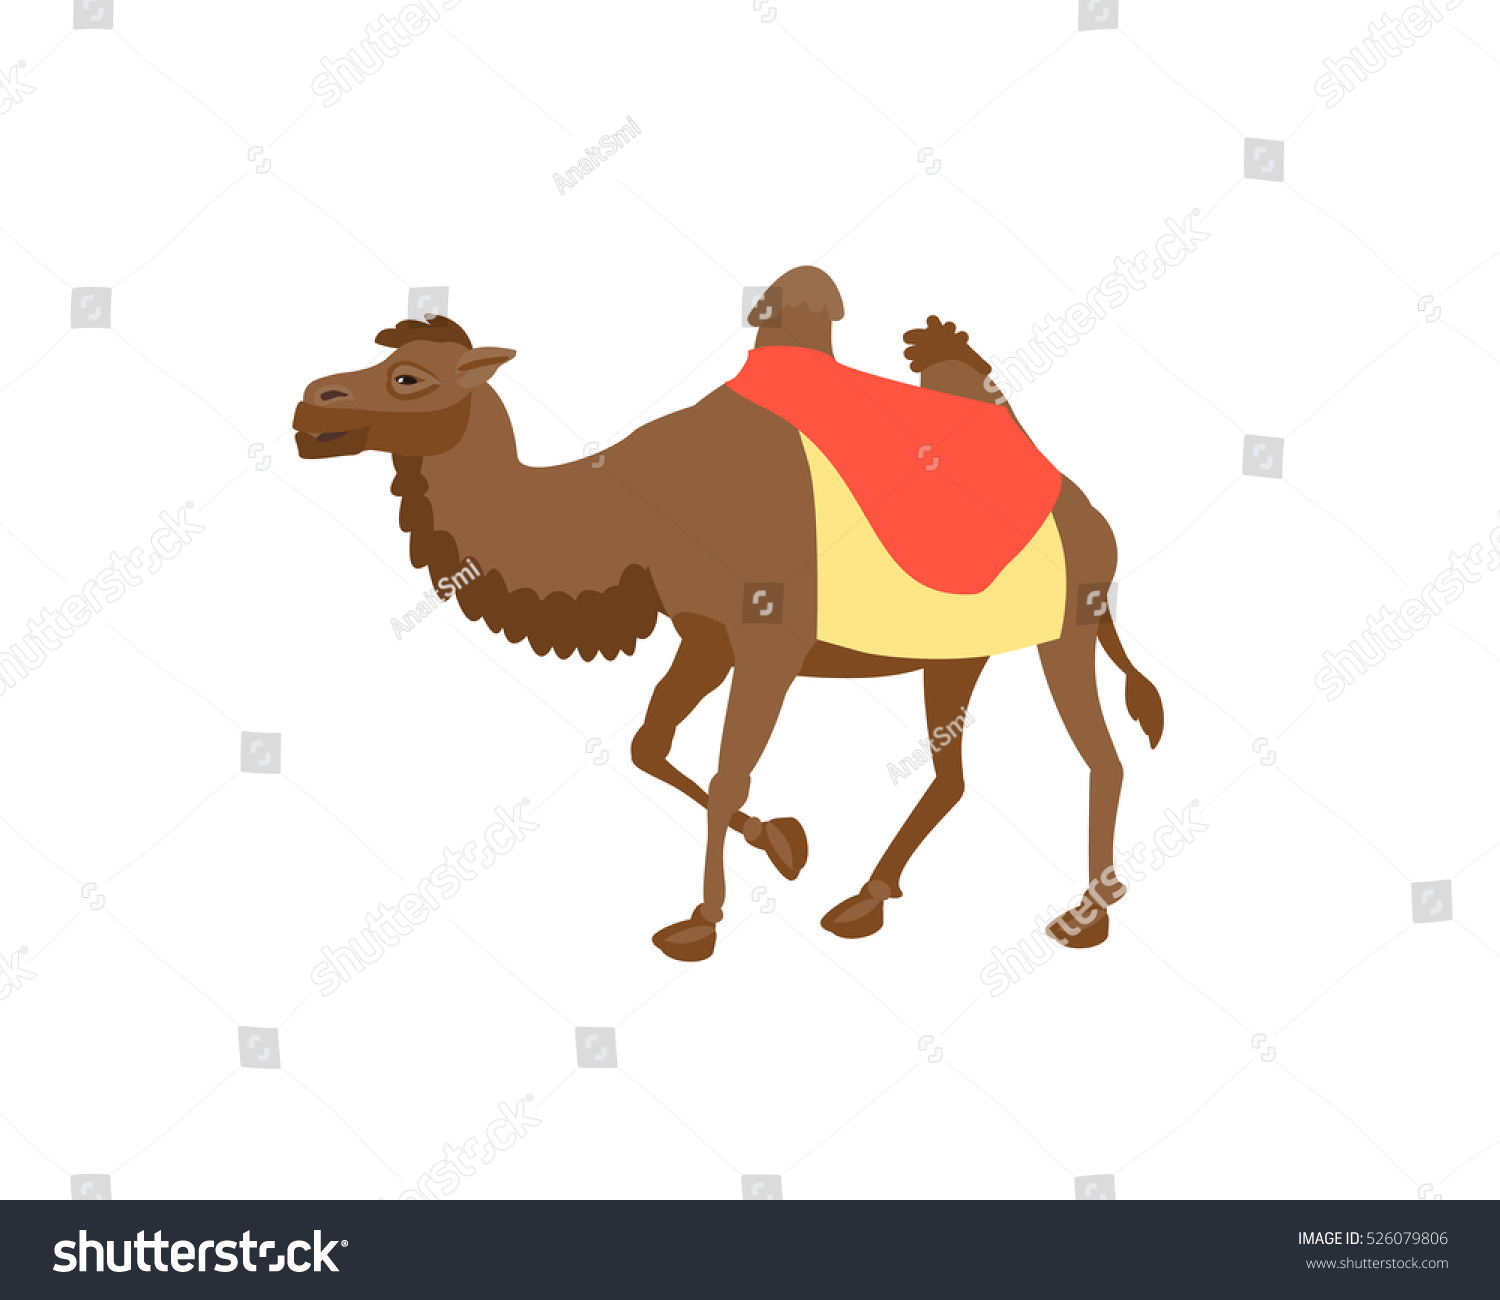 Simple Brown Two Hump Camel Illustration Stock Vector (2018 ...